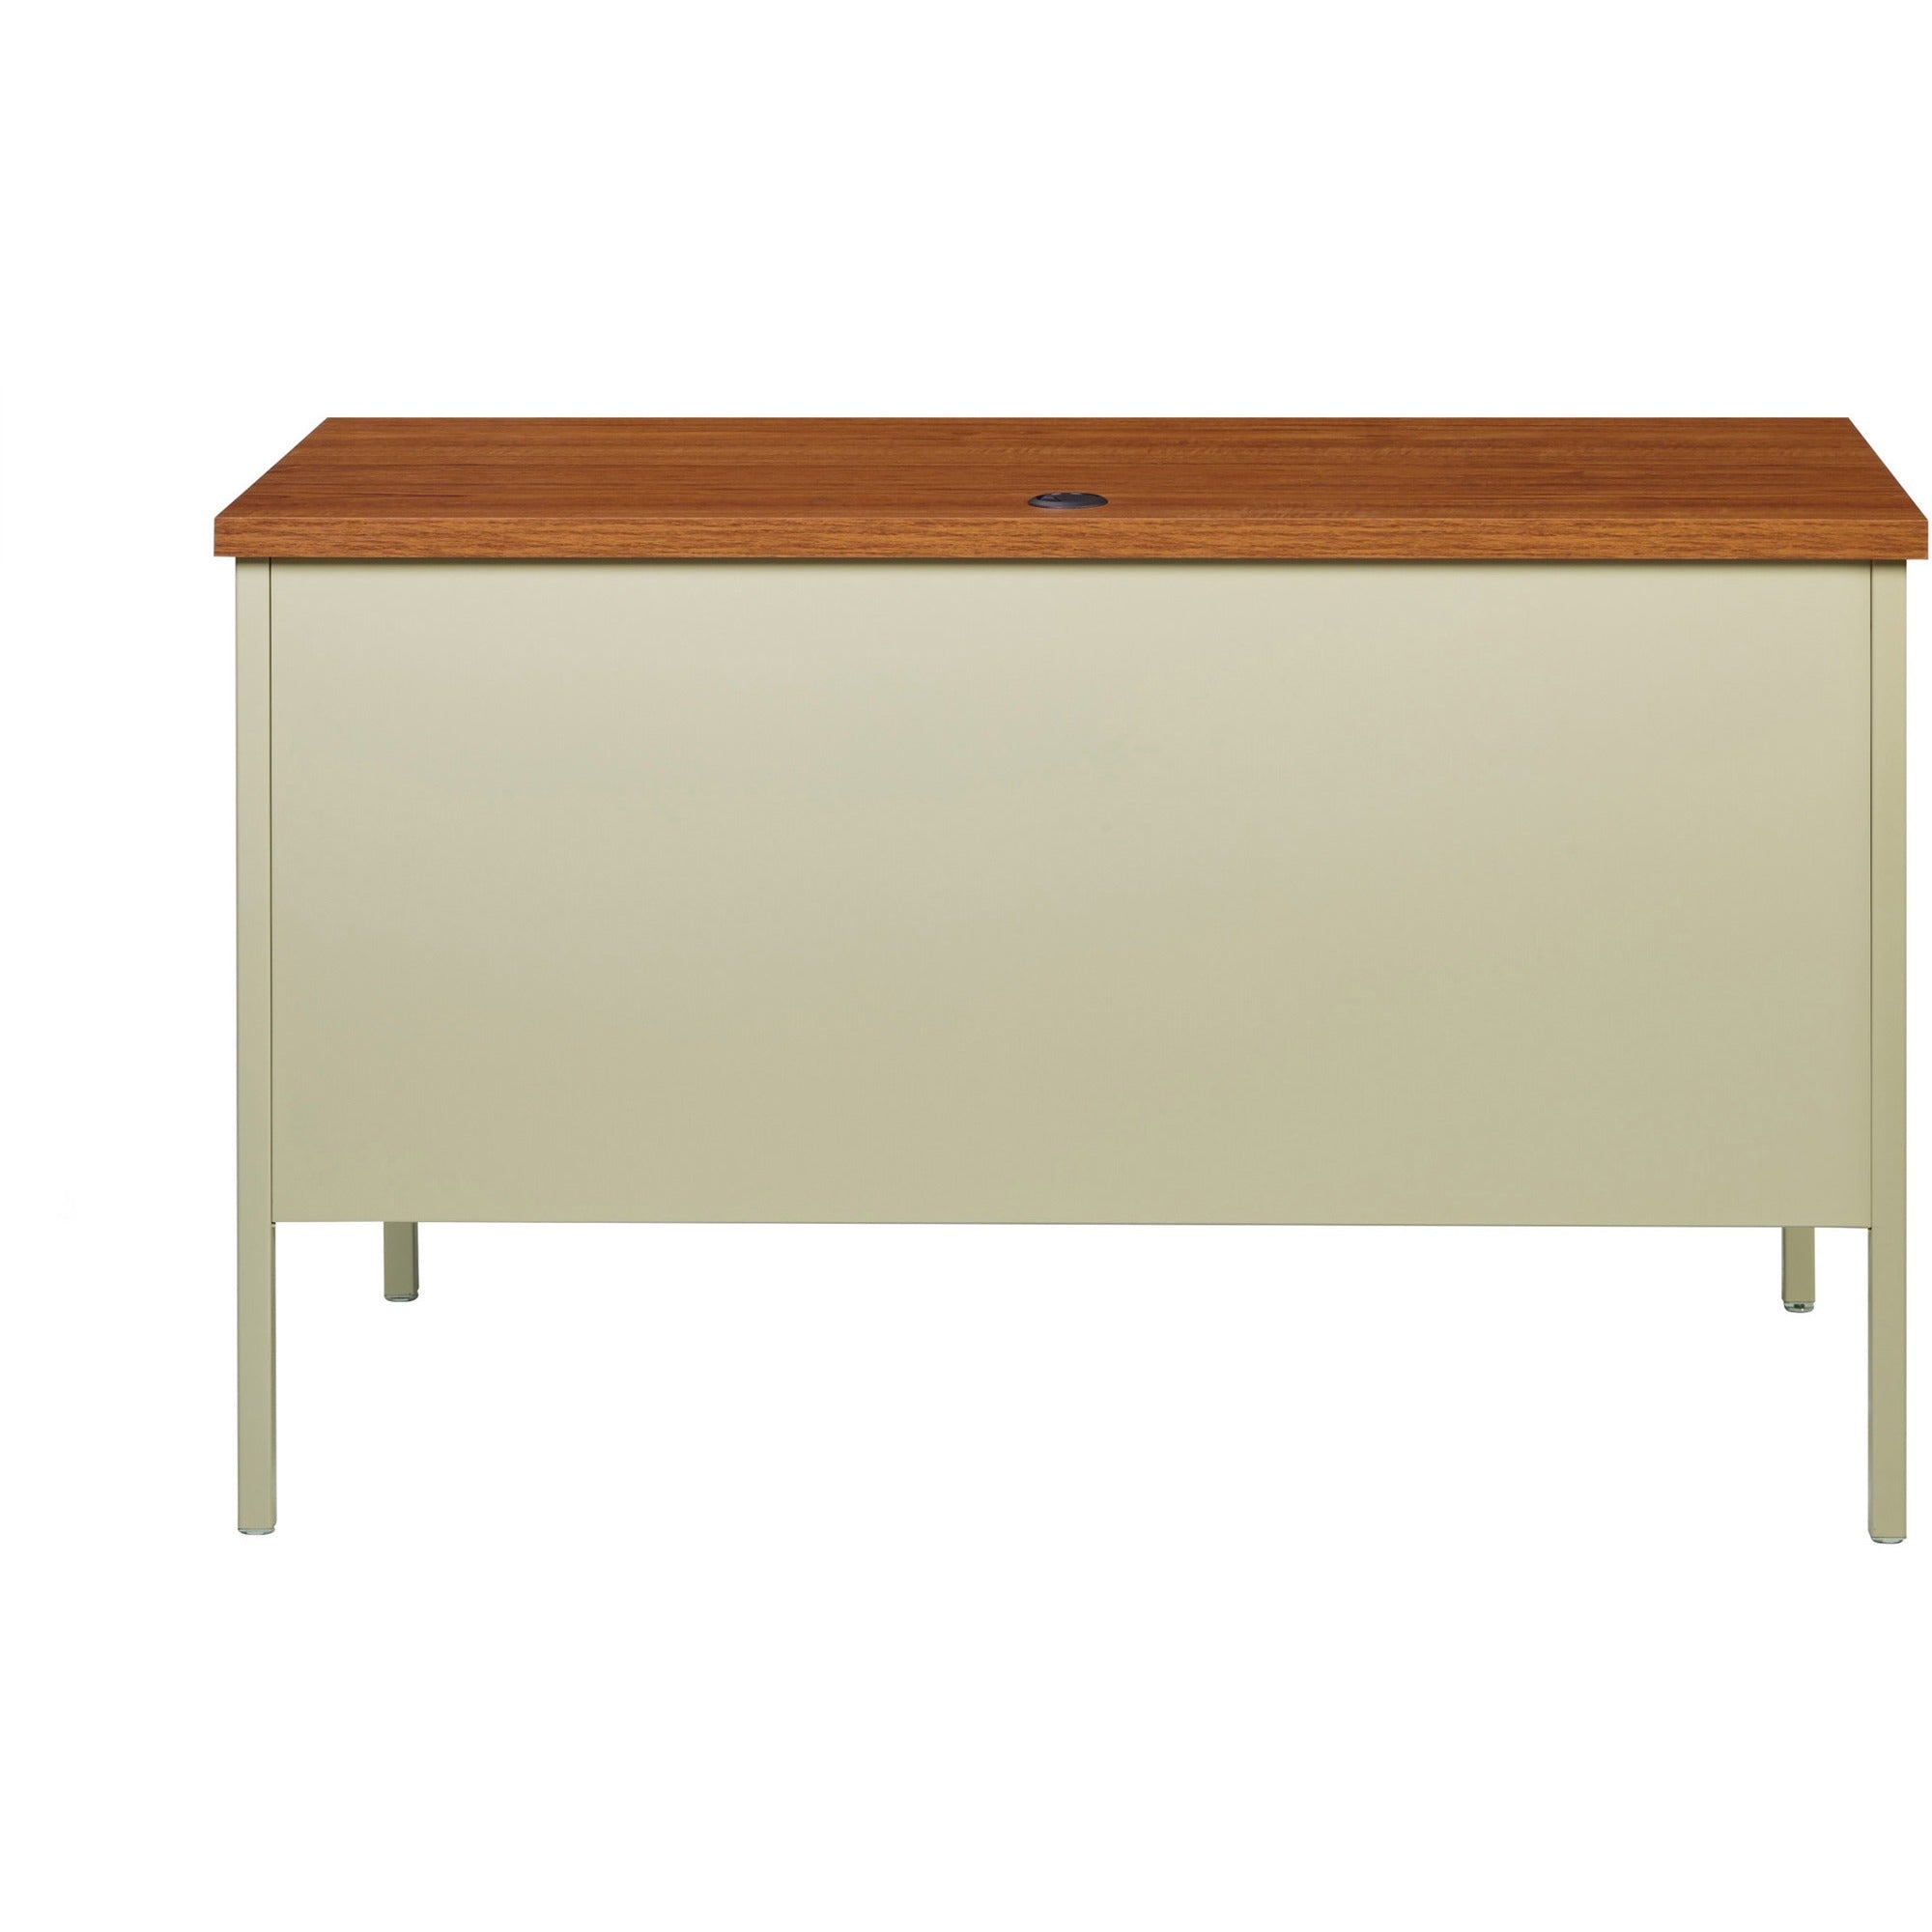 lorell-fortress-series-45-1-2-right-single-pedestal-desk-455-x-24295--11-table-top-box-file-drawers-single-pedestal-on-right-side-square-edge_llr66947 - 4